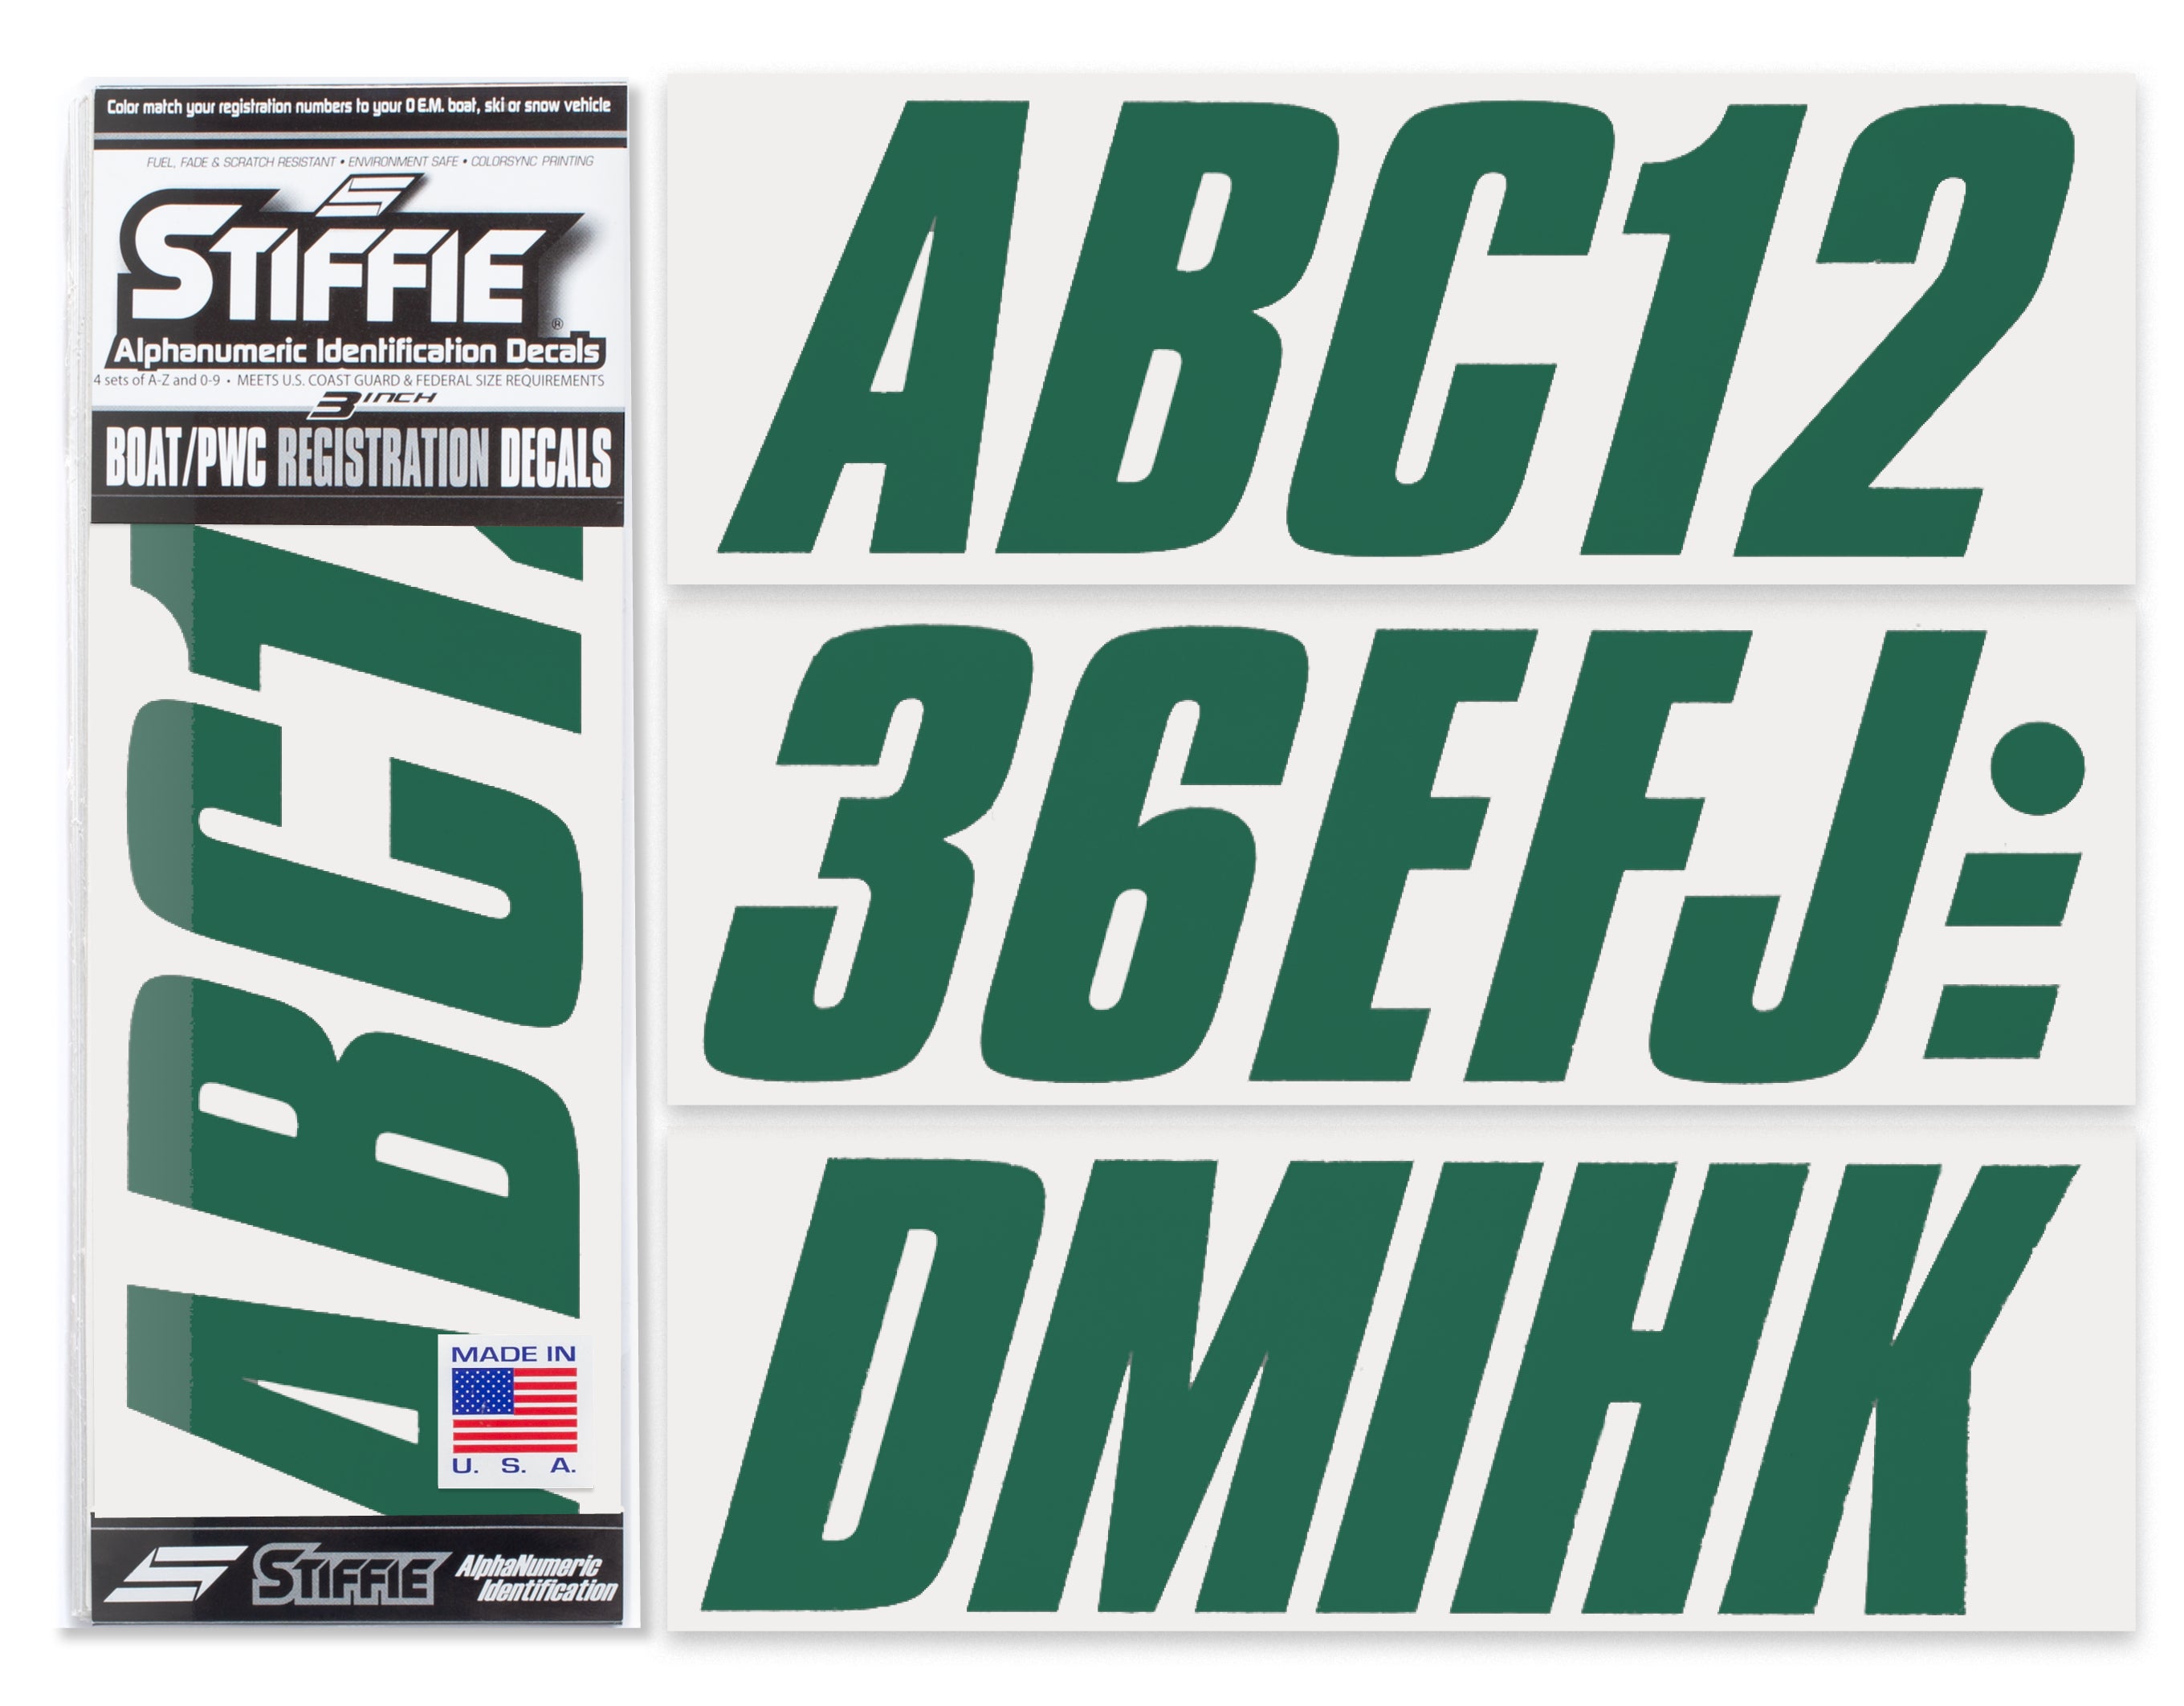 STIFFIE Shift Racing Green 3" ID Kit Alpha-Numeric Registration Identification Numbers Stickers Decals for Boats & Personal Watercraft